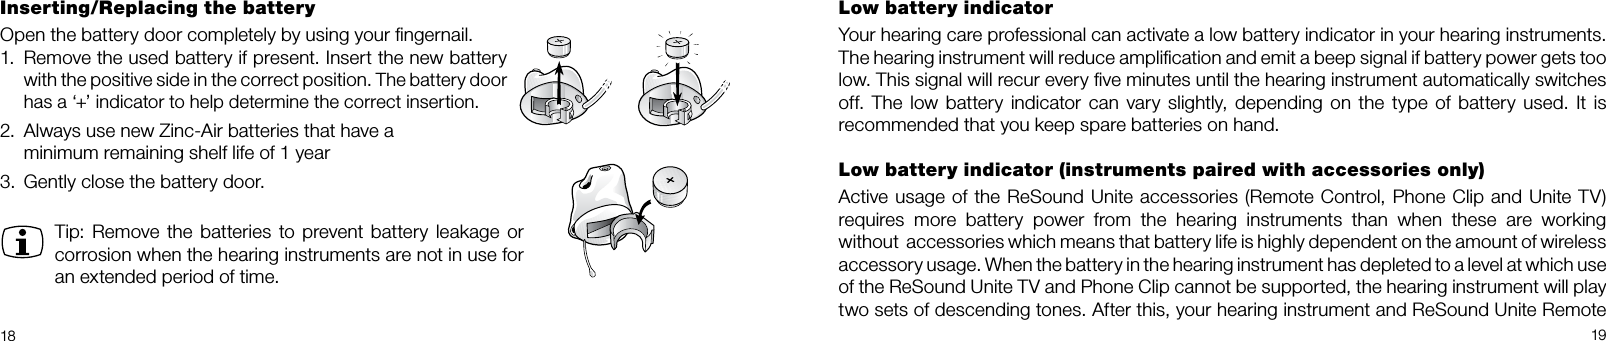 18 19Low battery indicatorYour hearing care professional can activate a low battery indicator in your hearing instruments.  The hearing instrument will reduce ampliﬁcation and emit a beep signal if battery power gets too low. This signal will recur every ﬁve minutes until the hearing instrument automatically switches off. The low battery indicator can vary slightly, depending on the type of battery used. It is  recommended that you keep spare batteries on hand. Low battery indicator (instruments paired with accessories only)Active usage of the ReSound Unite accessories (Remote Control, Phone Clip and Unite TV)requires more battery power from the hearing instruments than when these are working  without  accessories which means that battery life is highly dependent on the amount of wireless accessory usage. When the battery in the hearing instrument has depleted to a level at which use  of the ReSound Unite TV and Phone Clip cannot be supported, the hearing instrument will play  two sets of descending tones. After this, your hearing instrument and ReSound Unite Remote Inserting/Replacing the batteryOpen the battery door completely by using your ﬁngernail. 1.  Remove the used battery if present. Insert the new battery with the positive side in the correct position. The battery door has a ‘+’ indicator to help determine the correct insertion.2.  Always use new Zinc-Air batteries that have a  minimum remaining shelf life of 1 year3.  Gently close the battery door.Tip: Remove the batteries to prevent battery leakage or corrosion when the hearing instruments are not in use for an extended period of time.